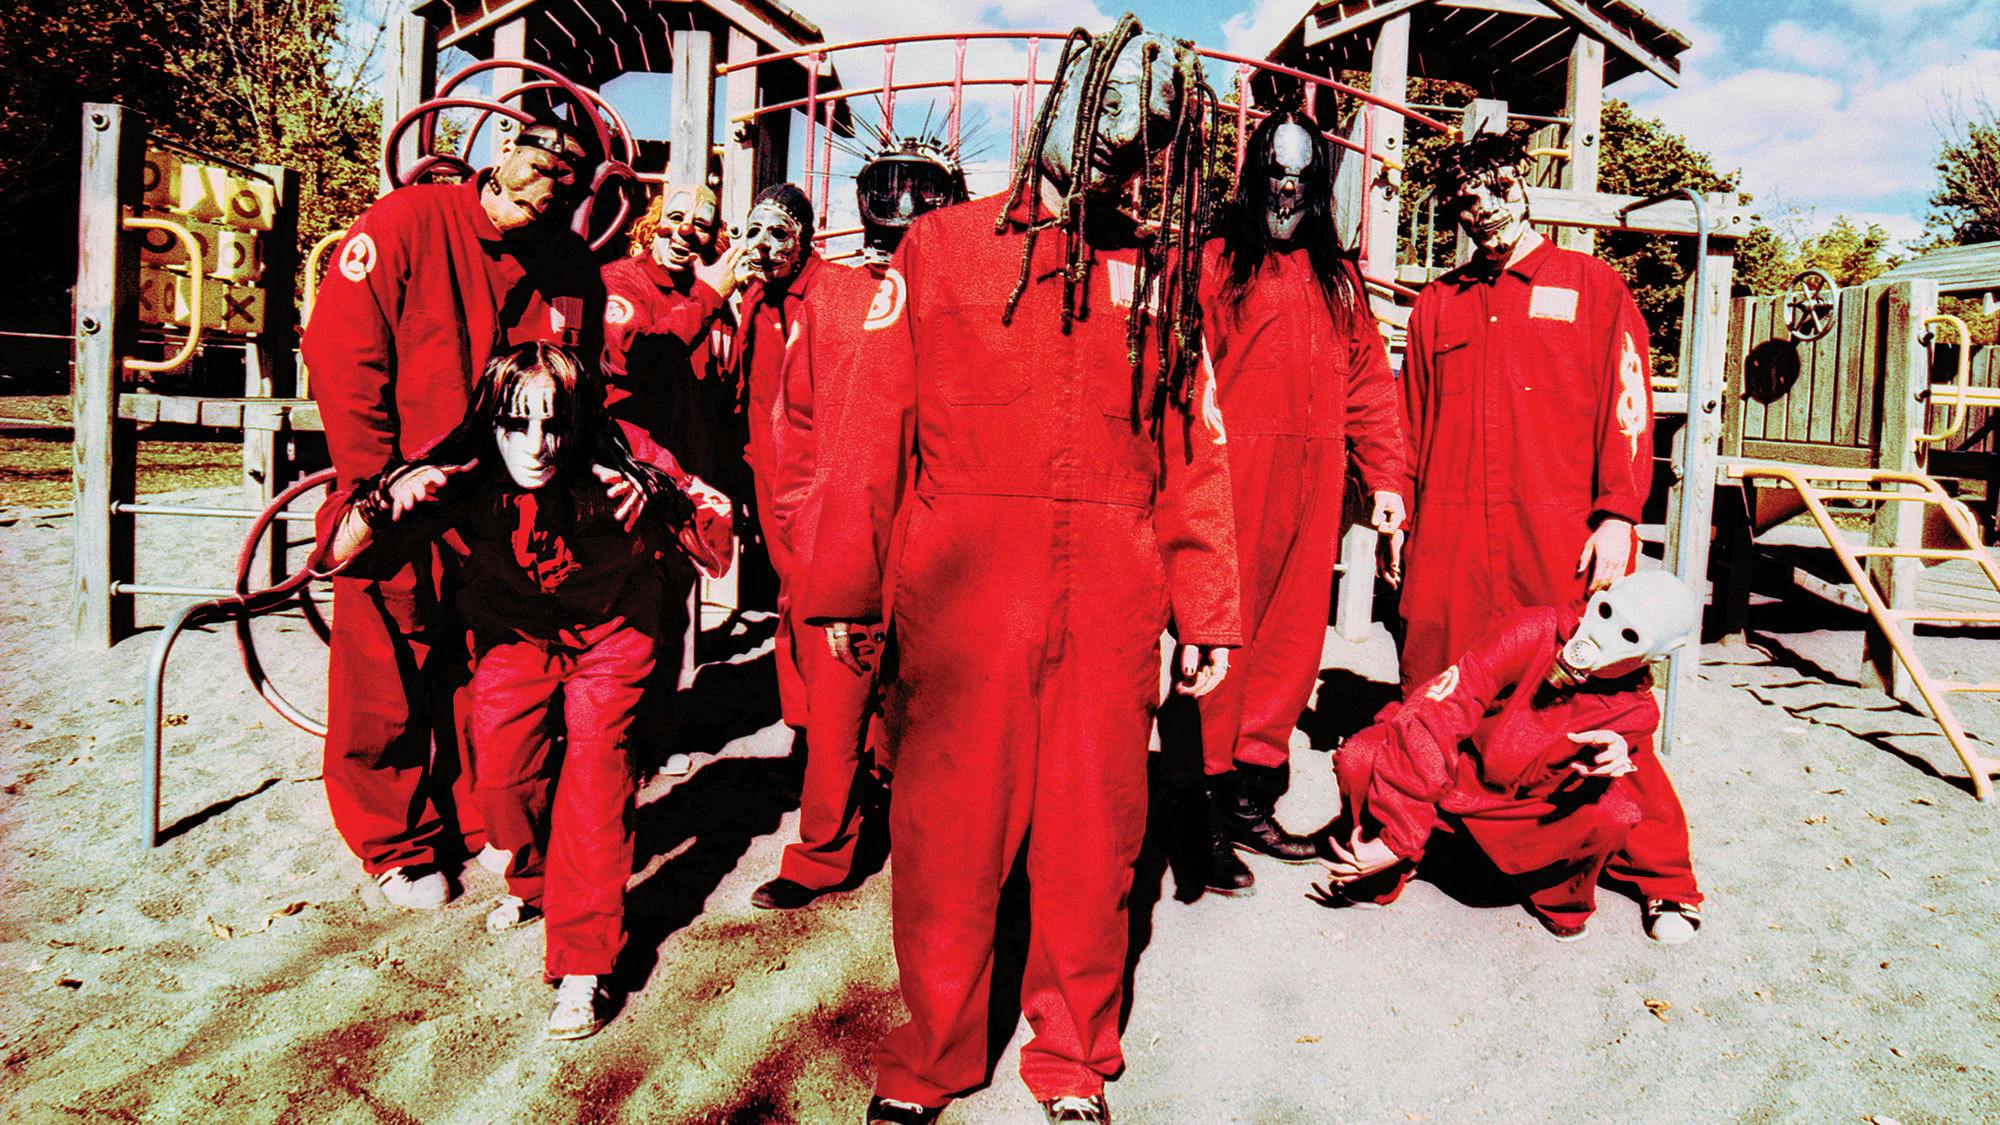 “Thoroughly unpleasant and truly unforgettable”: Our original 1999 review of Slipknot's debut album